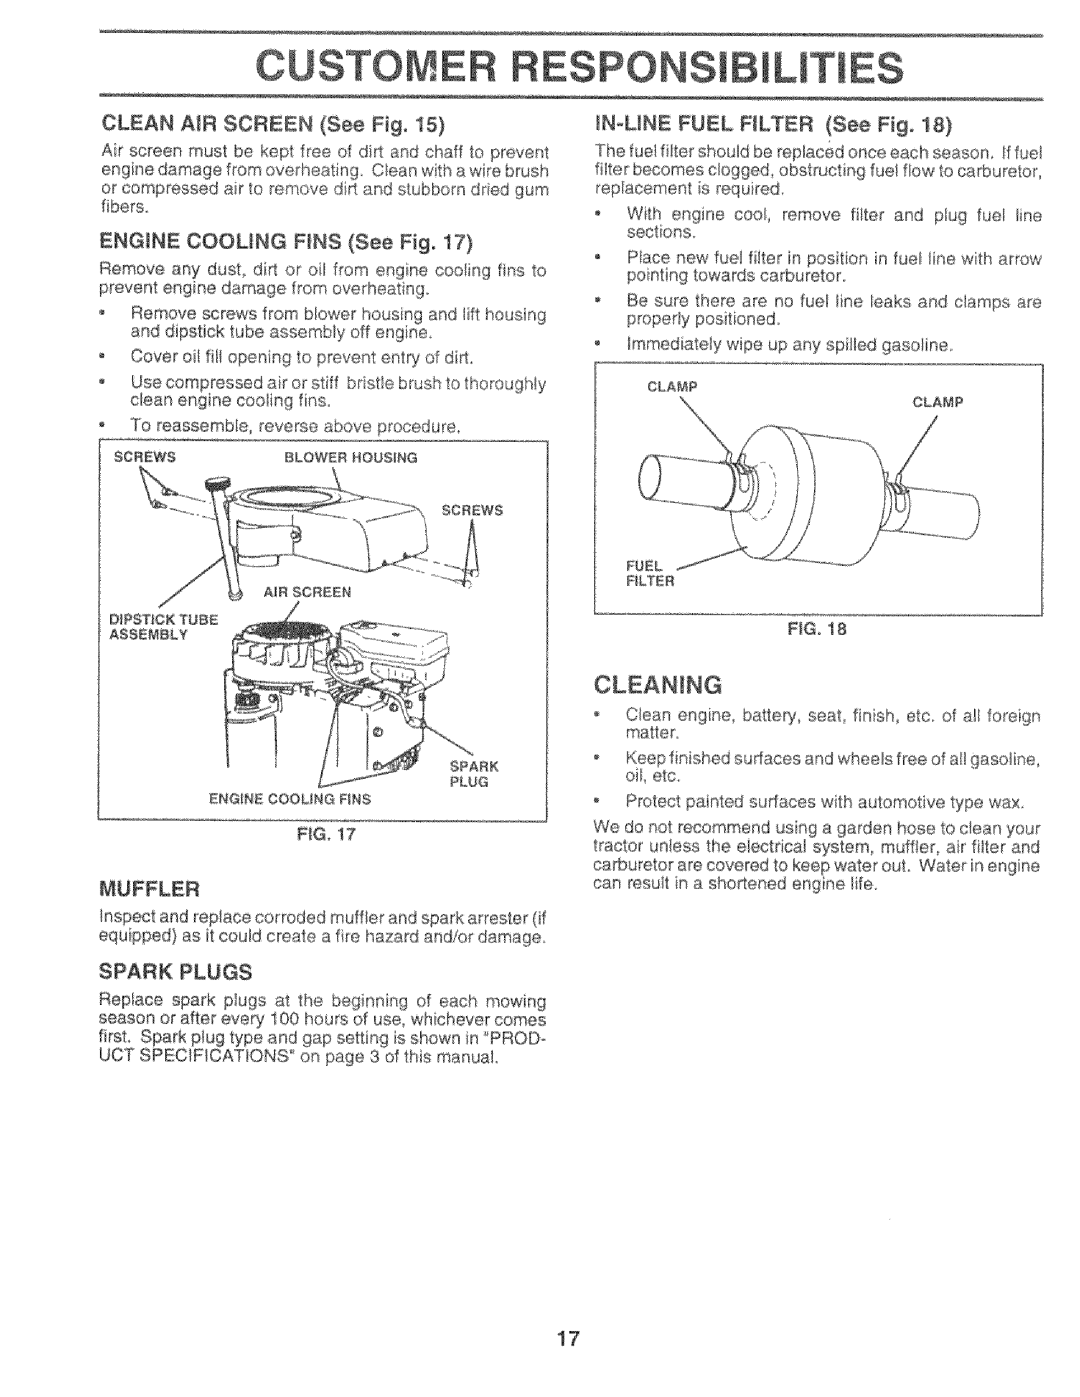 Sears 917.25759 manual CLEAN A_R SCREEN See Fig, ENGINE COOLING FINS See Fig, Spark Plugs, N-LINEFUEL FLTER See Fig 